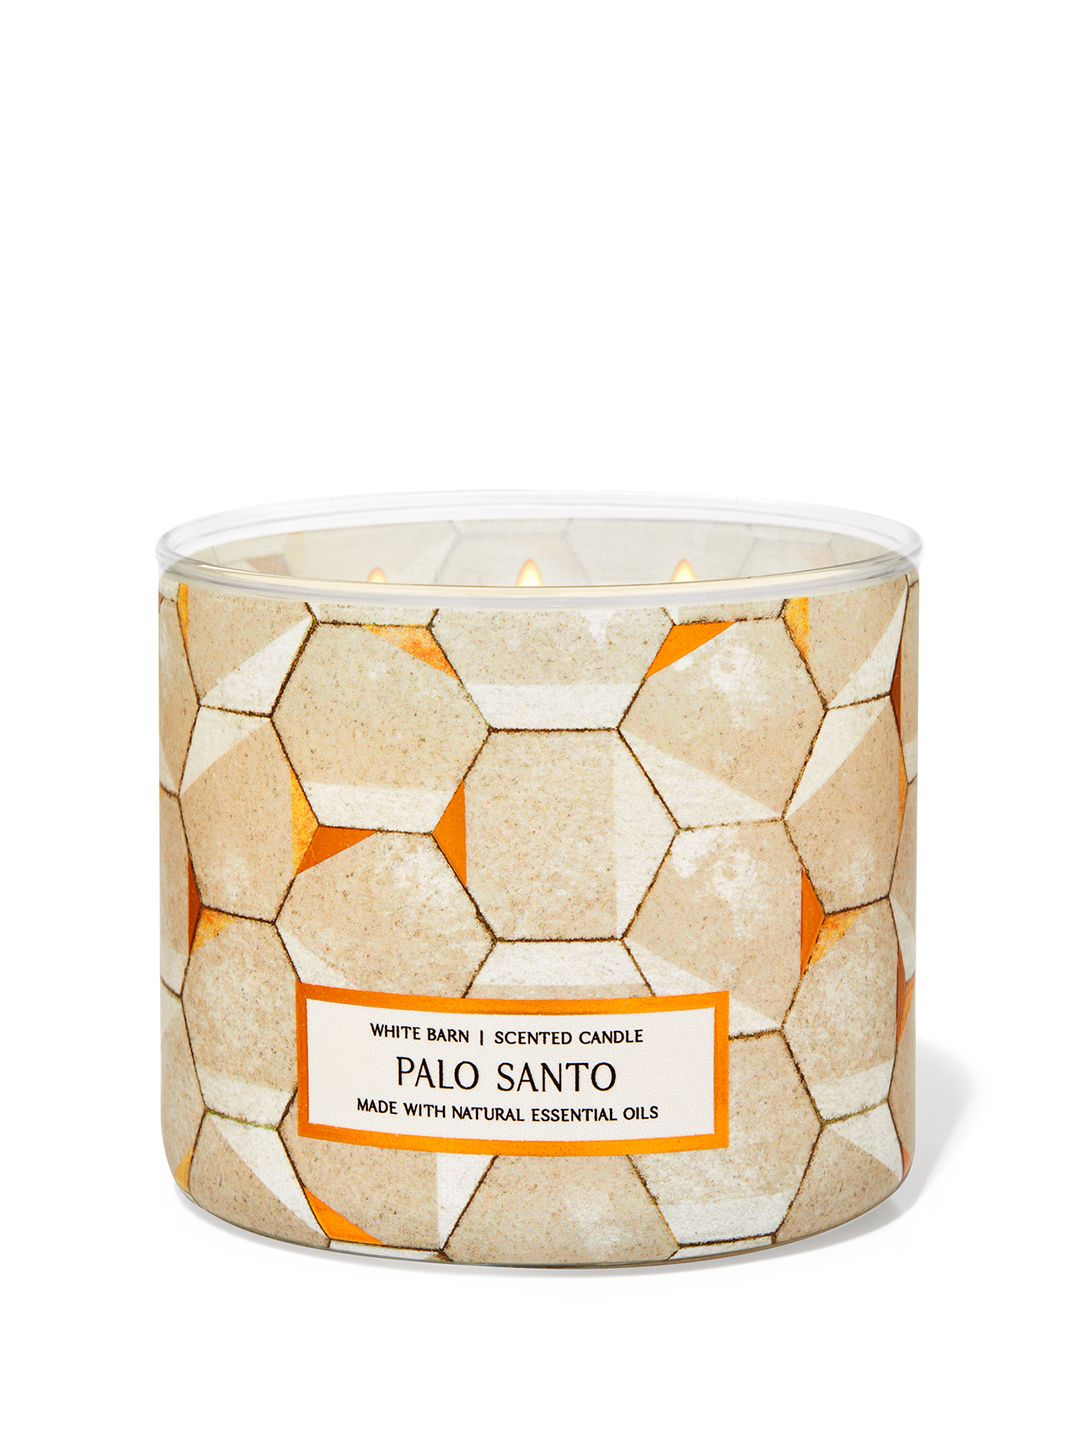 Bath & Body Works White Barn Palo Santo 3-Wick Scented Candle with Essential Oils - 411 g Price in India